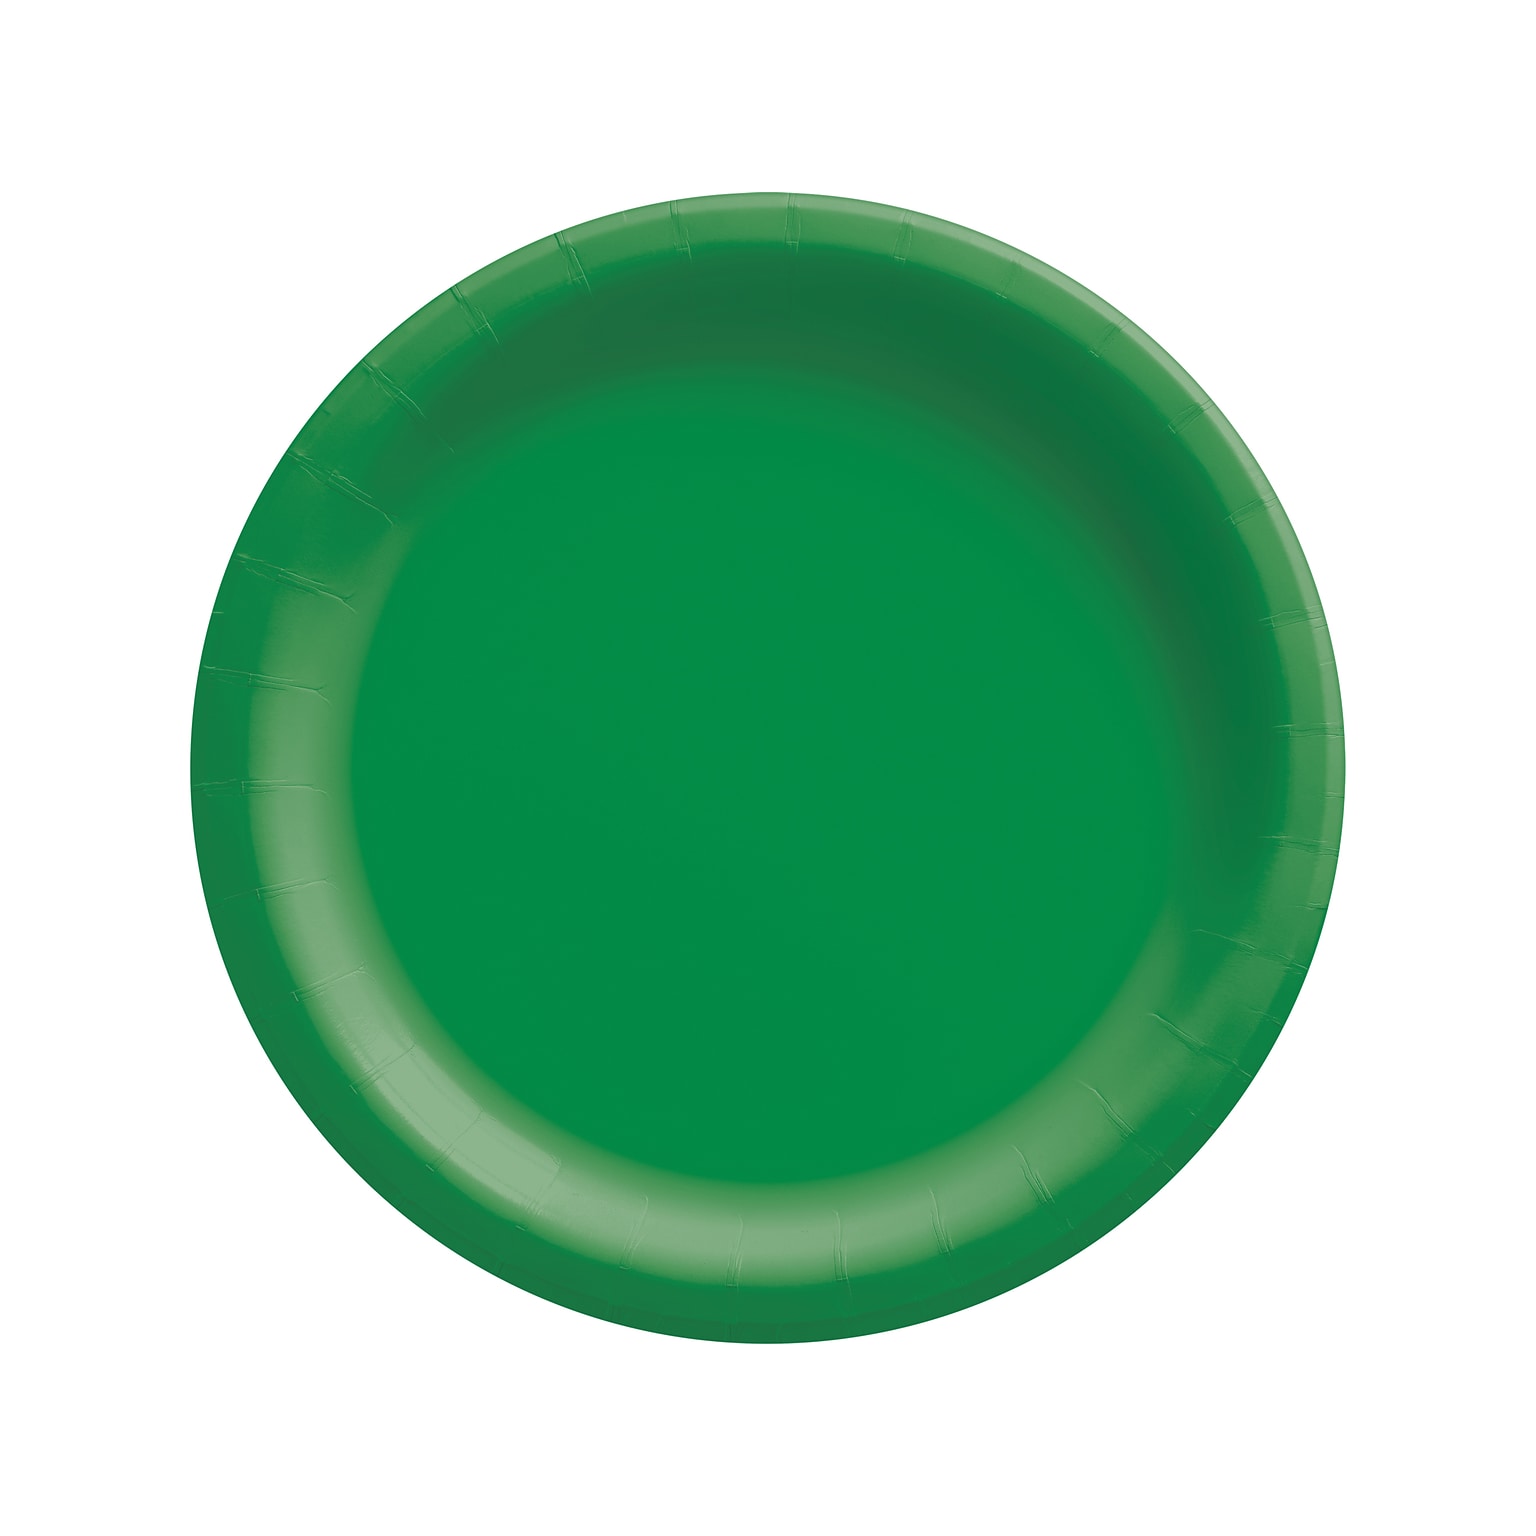 Amscan 6.75 Paper Plate, Green, 50 Plates/Pack, 4 Packs/Set (640011.03)